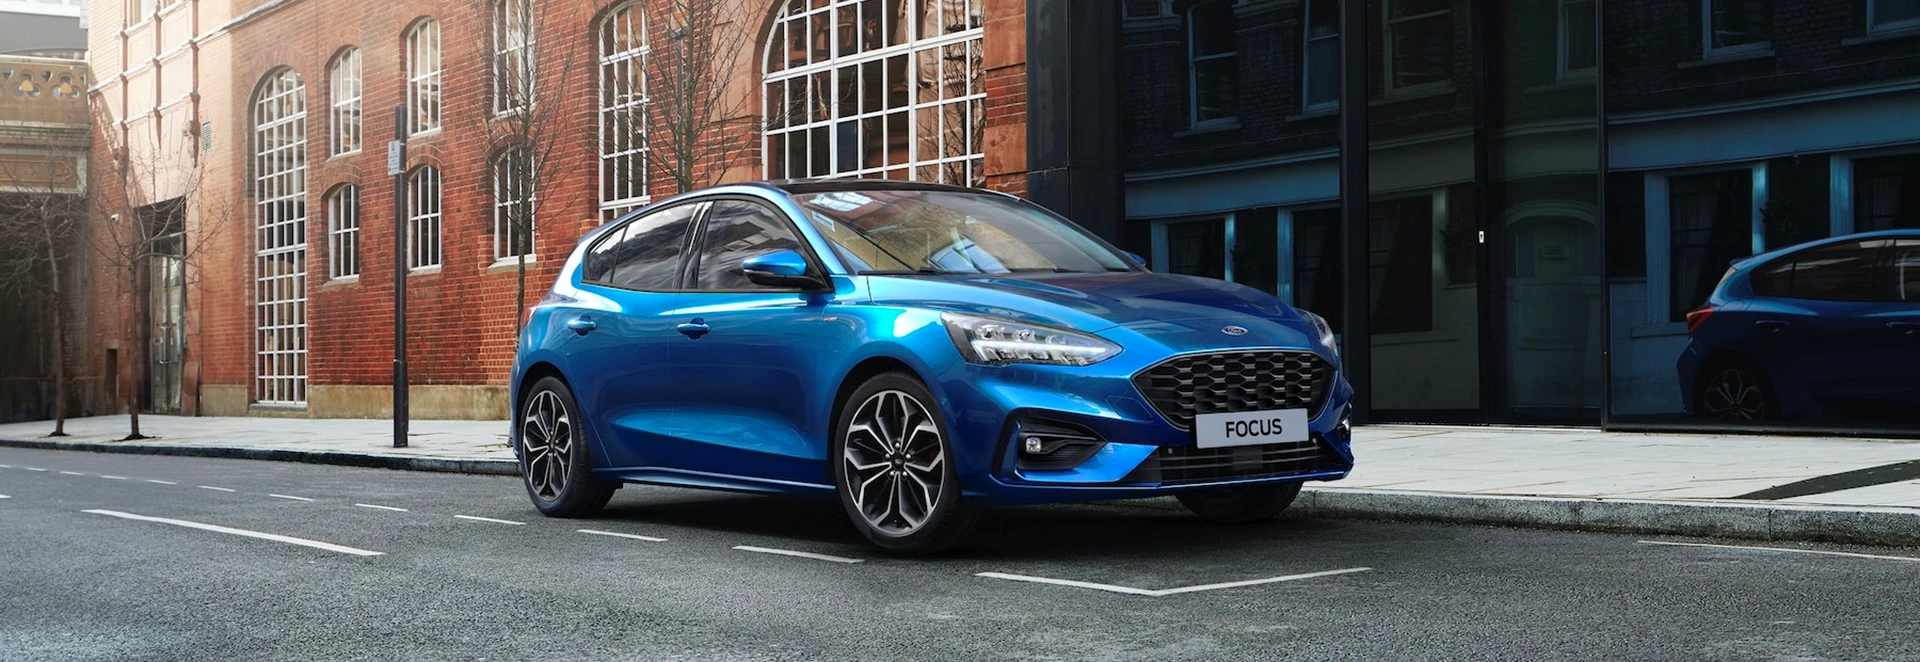 Ford Focus updated with electrified powertrains and fresh tech 